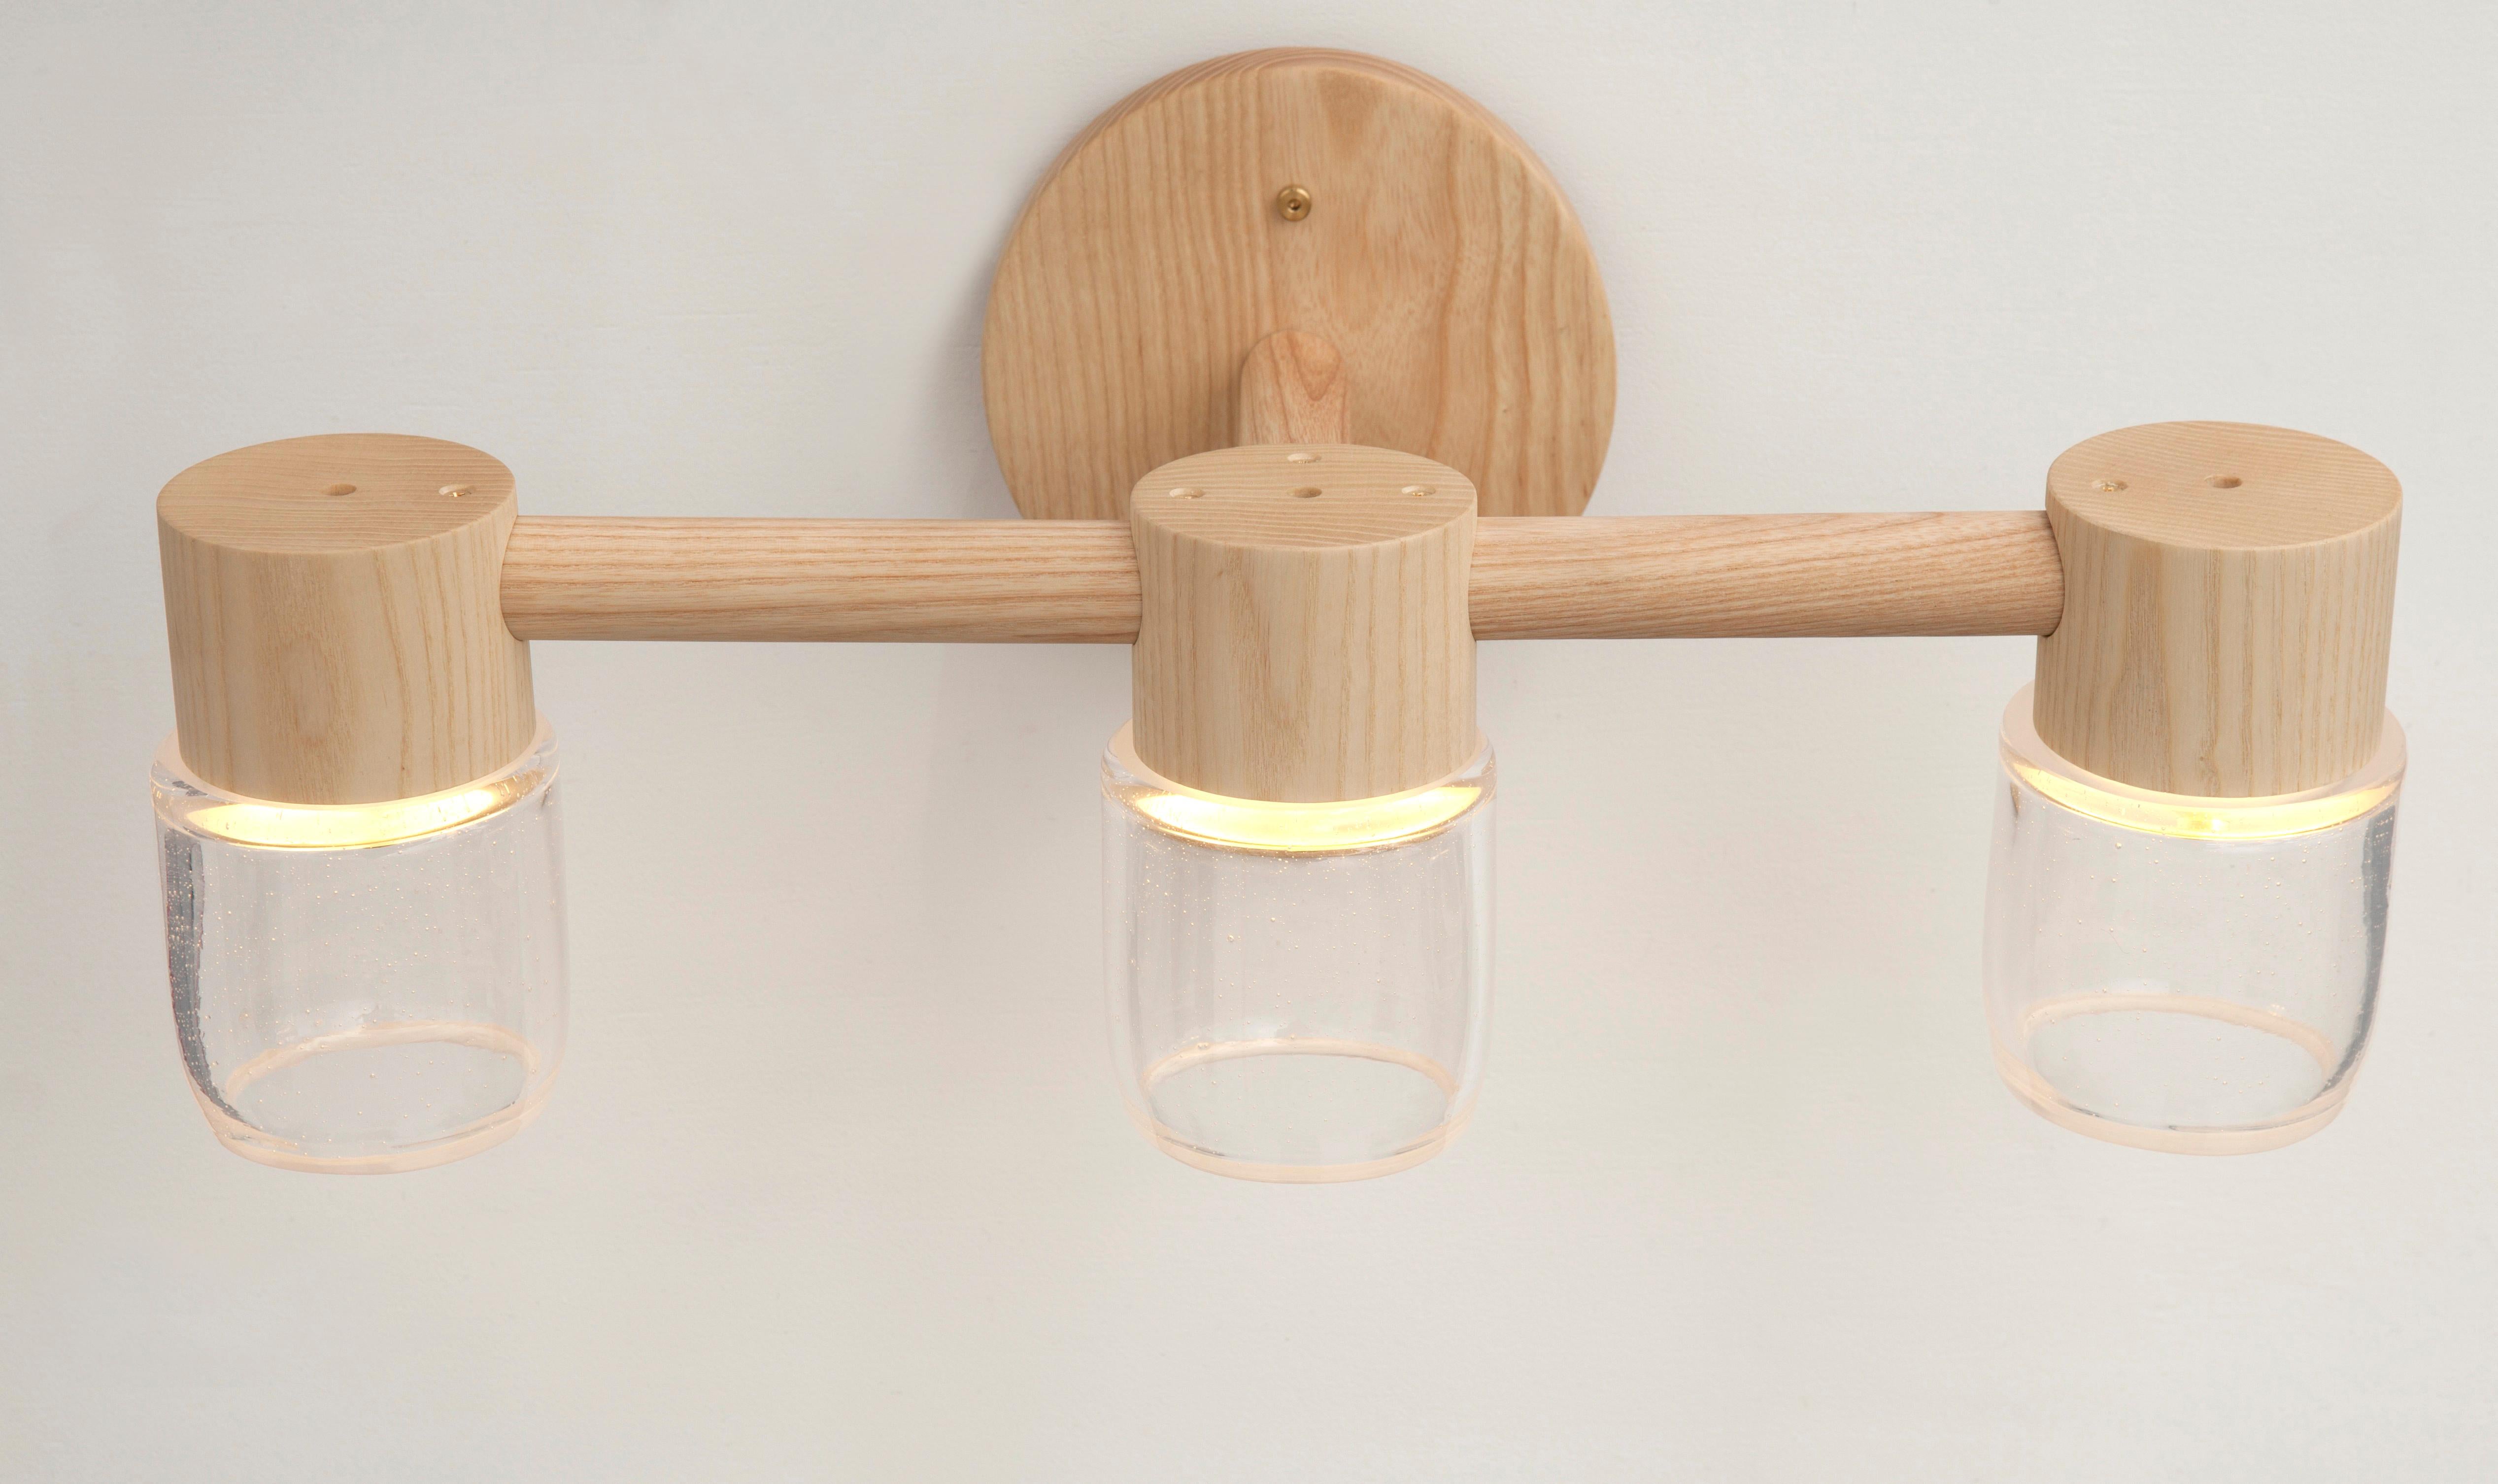 This handmade sconce pairs a minimal solid wood canopy with hand blown glass diffusers. Efficient LED lighting components are neatly hidden in each canopy allowing the glass diffusers to illuminate without a visible bulb. 

Built in the Pacific